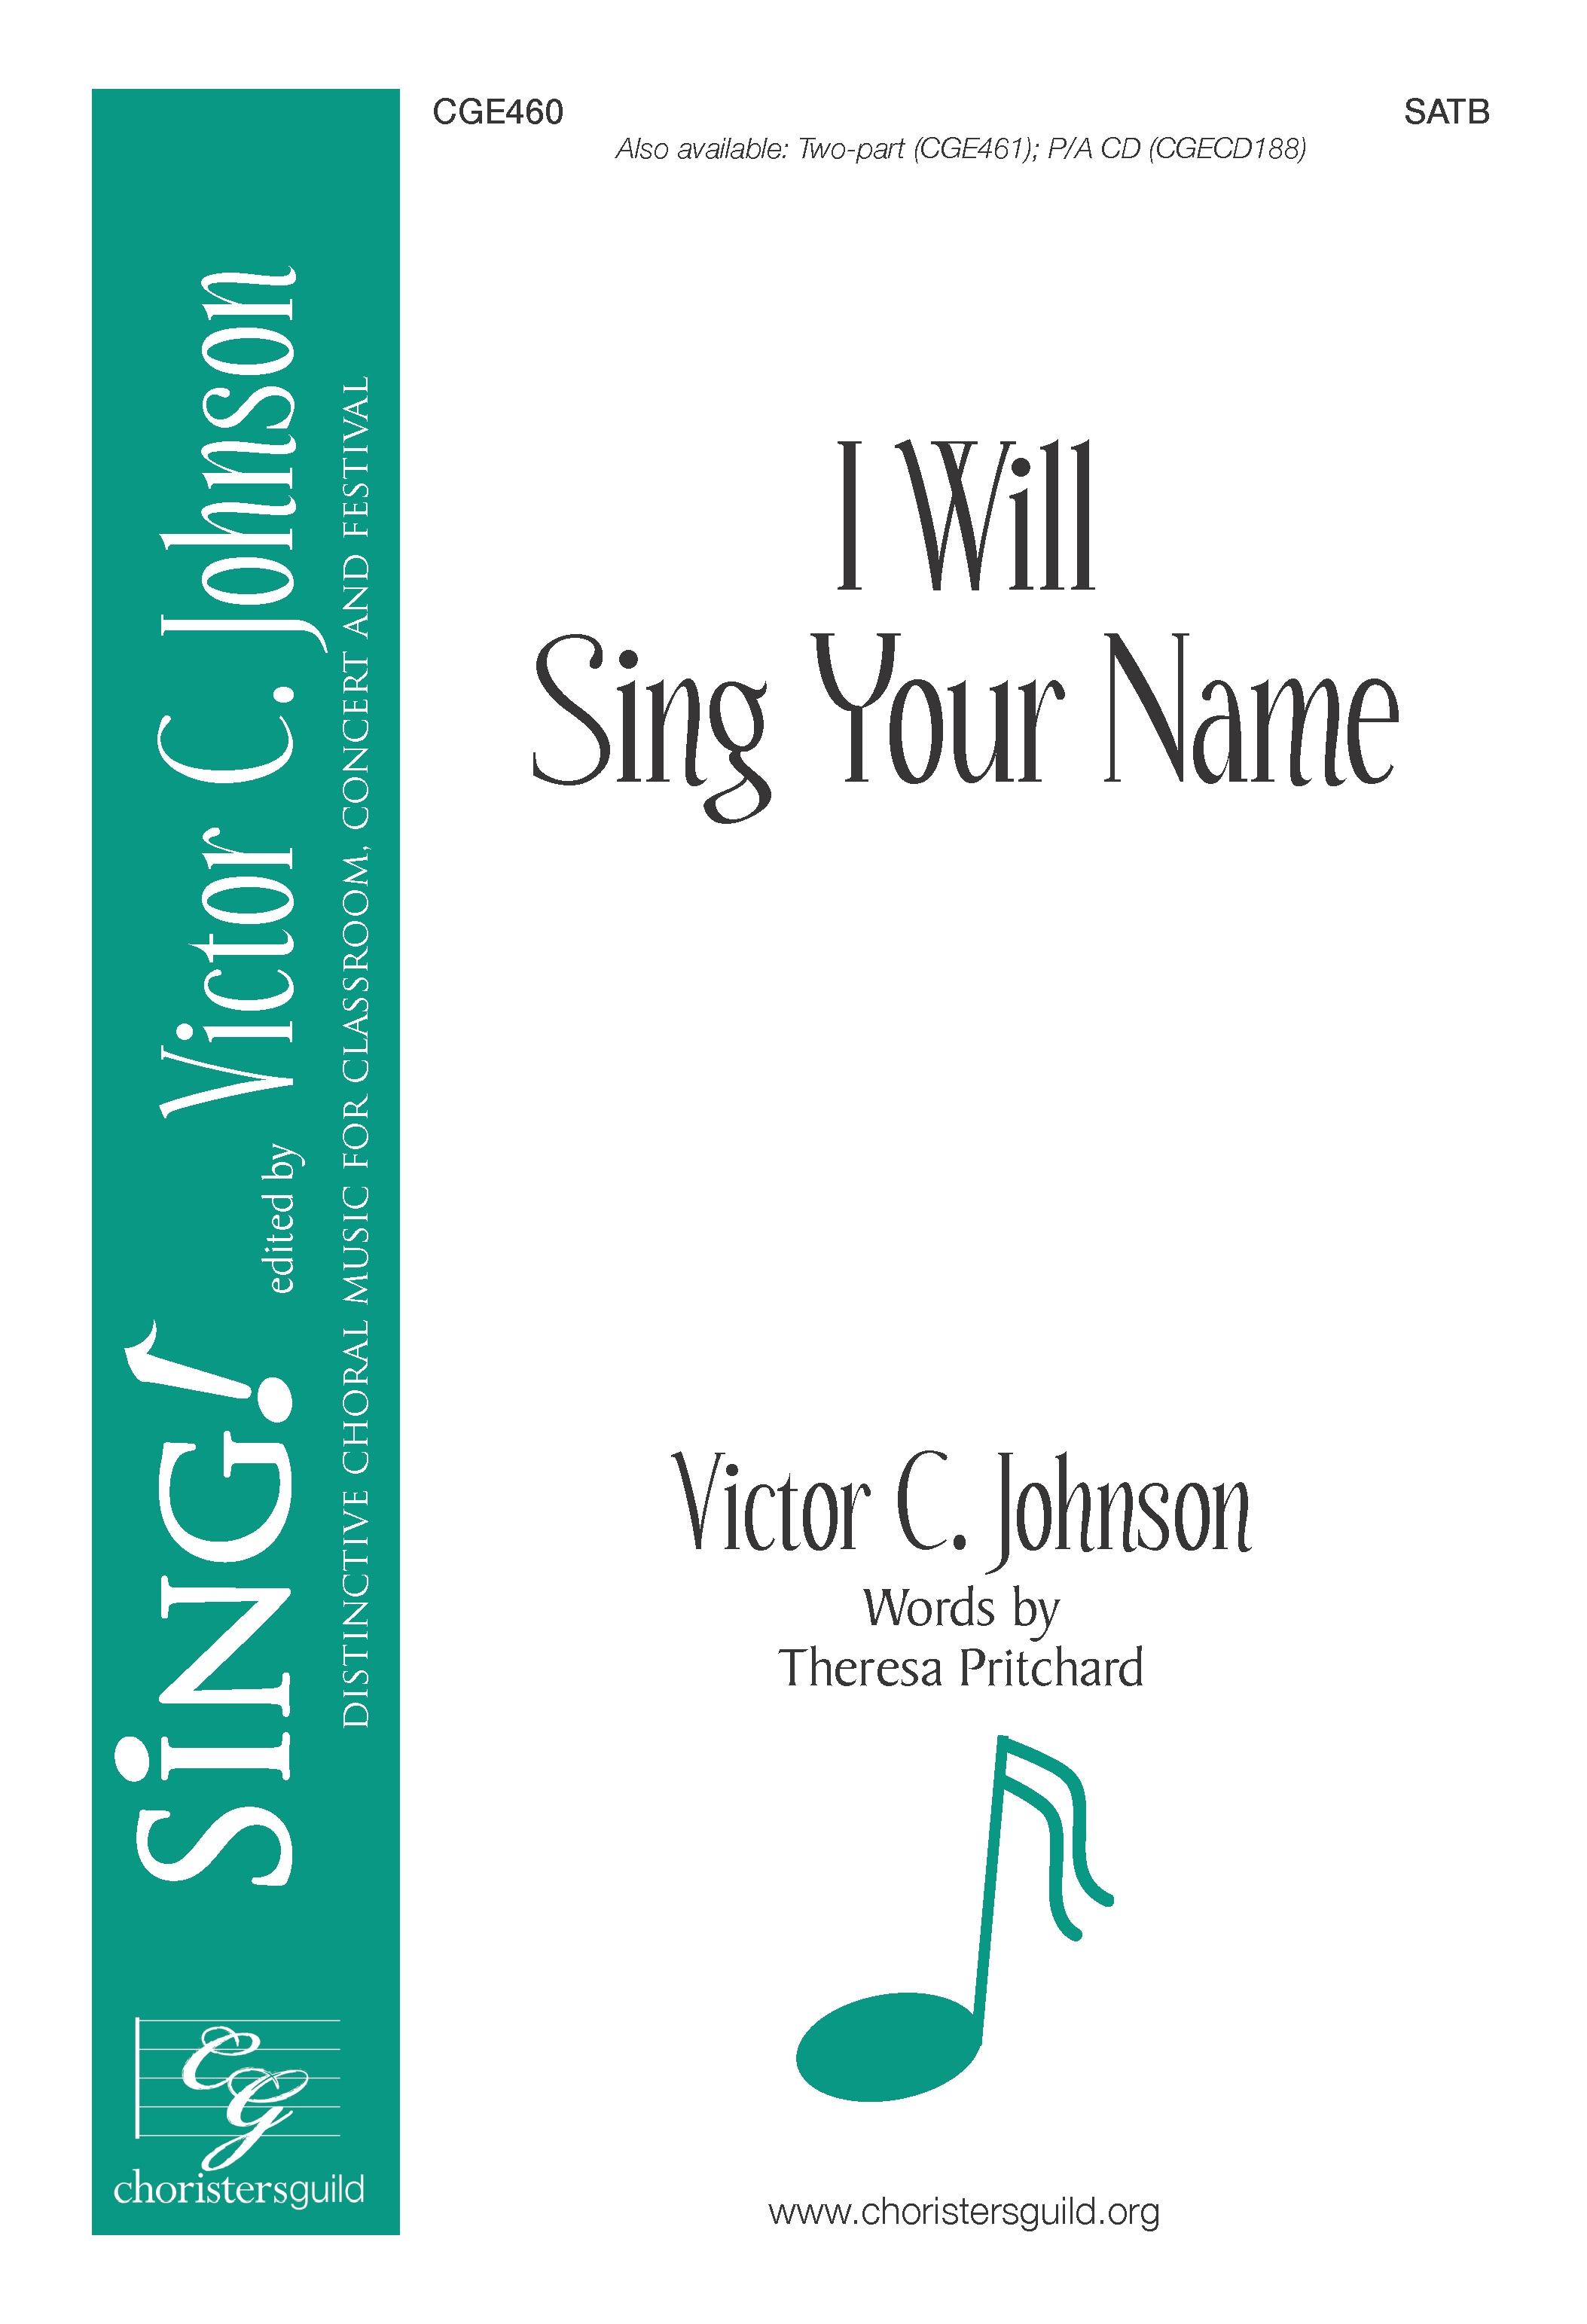 I Will Sing Your Name - SATB